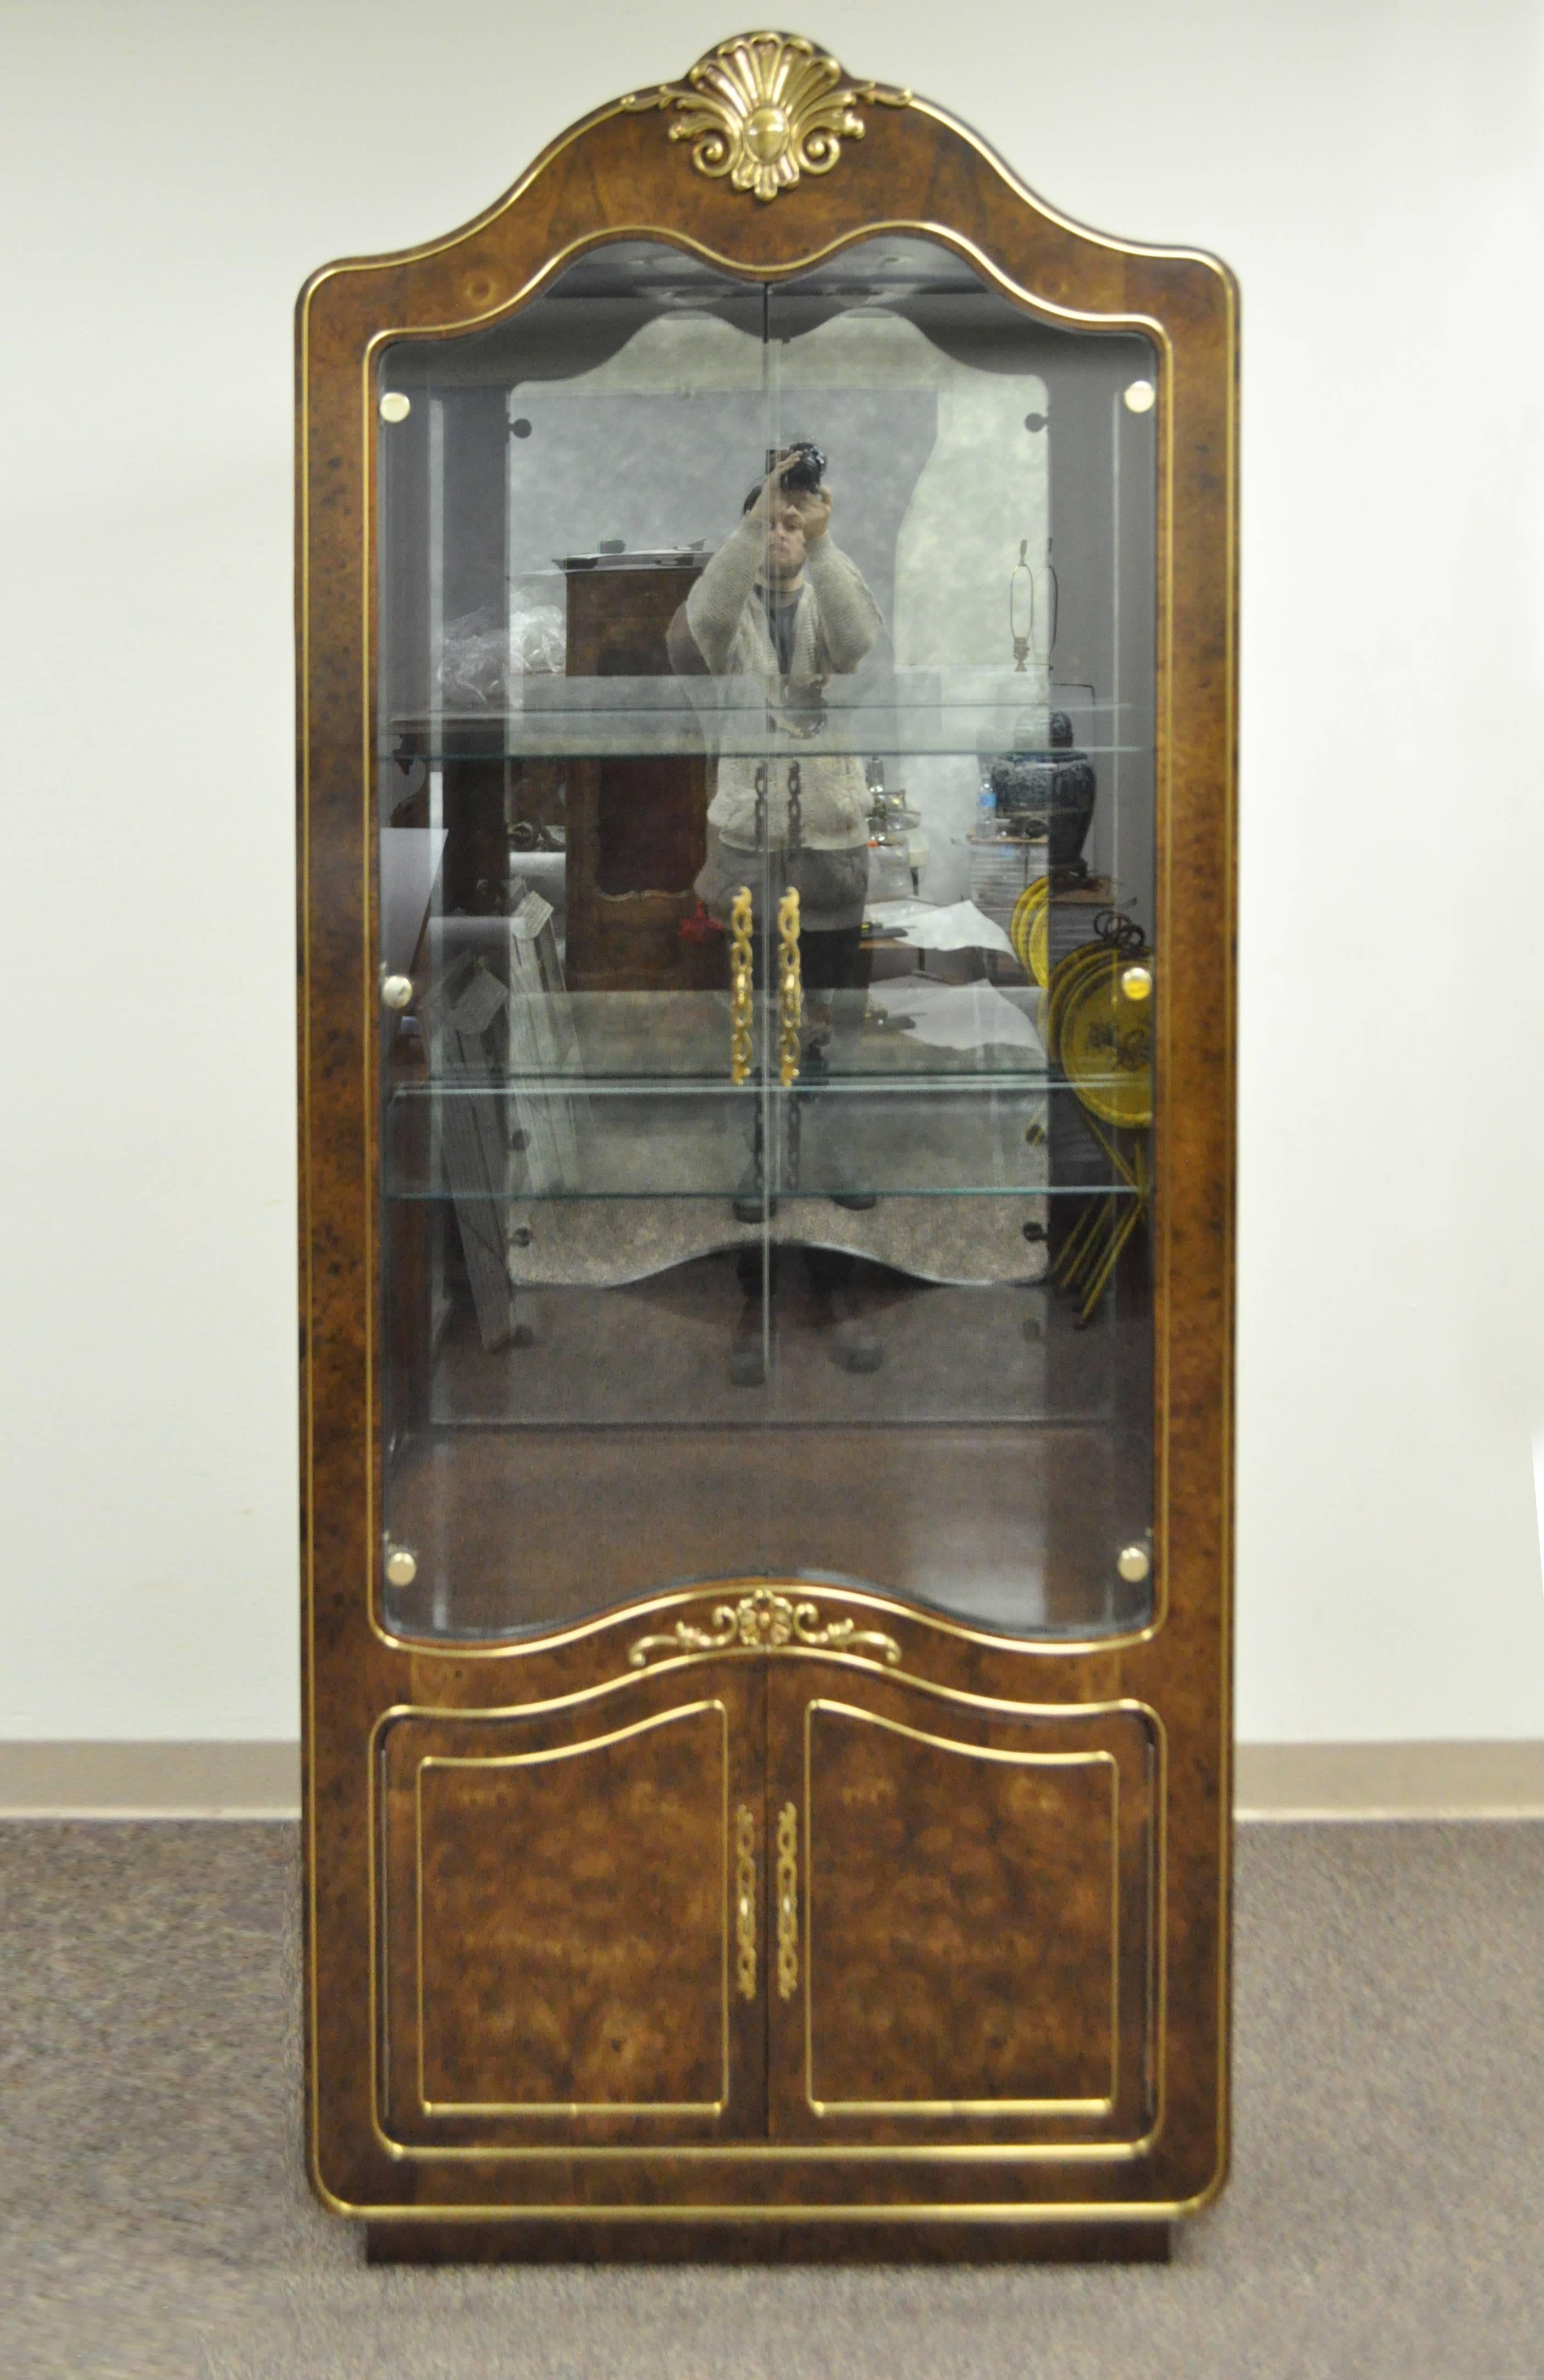 Remarkable Amboyna burl wood French Hollywood Regency style curio display cabinet by Mastercraft. Etagere cabinet / bookcase features a lighted interior with dimmer, brass inlaid trim, brass central shell form crest, bonnet top, two swing clear